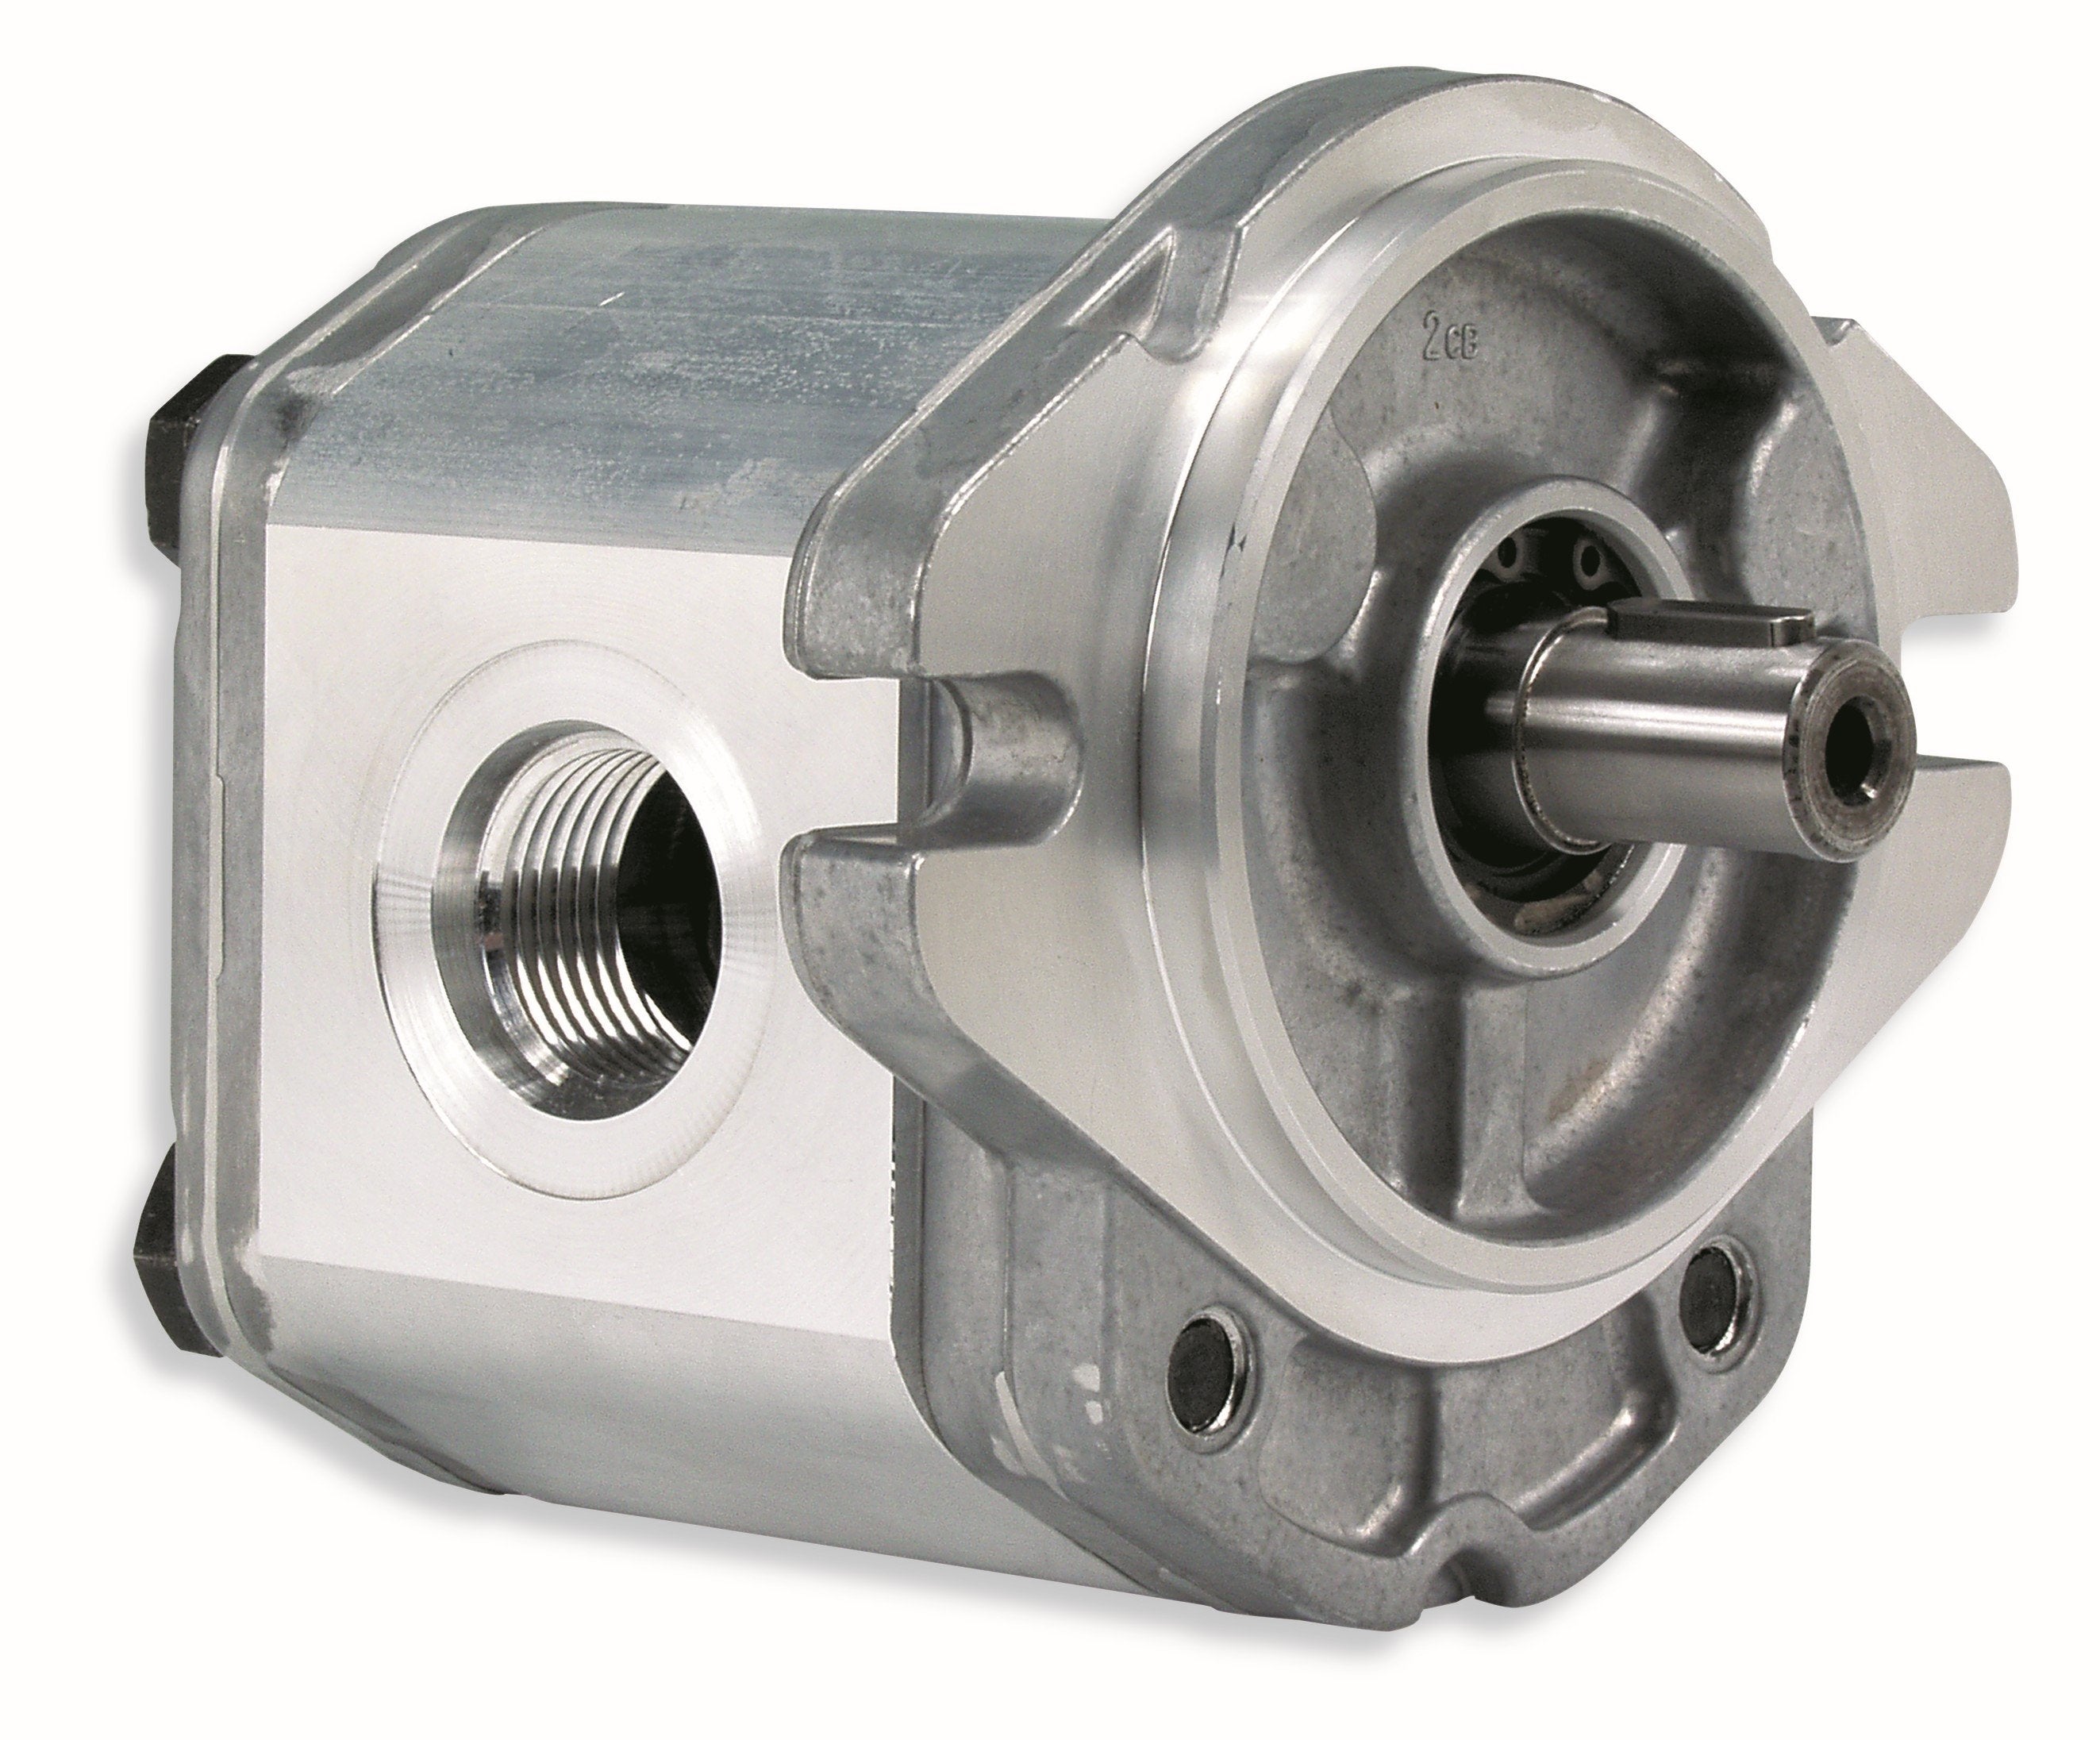 GHM3A-R-110-E4 : Marzocchi Gear Motor, Bidirectional, 71cc, 2900psi rated, 2500RPM, 1.25" Code 61 ports, 7/8" Bore x 1/4" Keyed Shaft